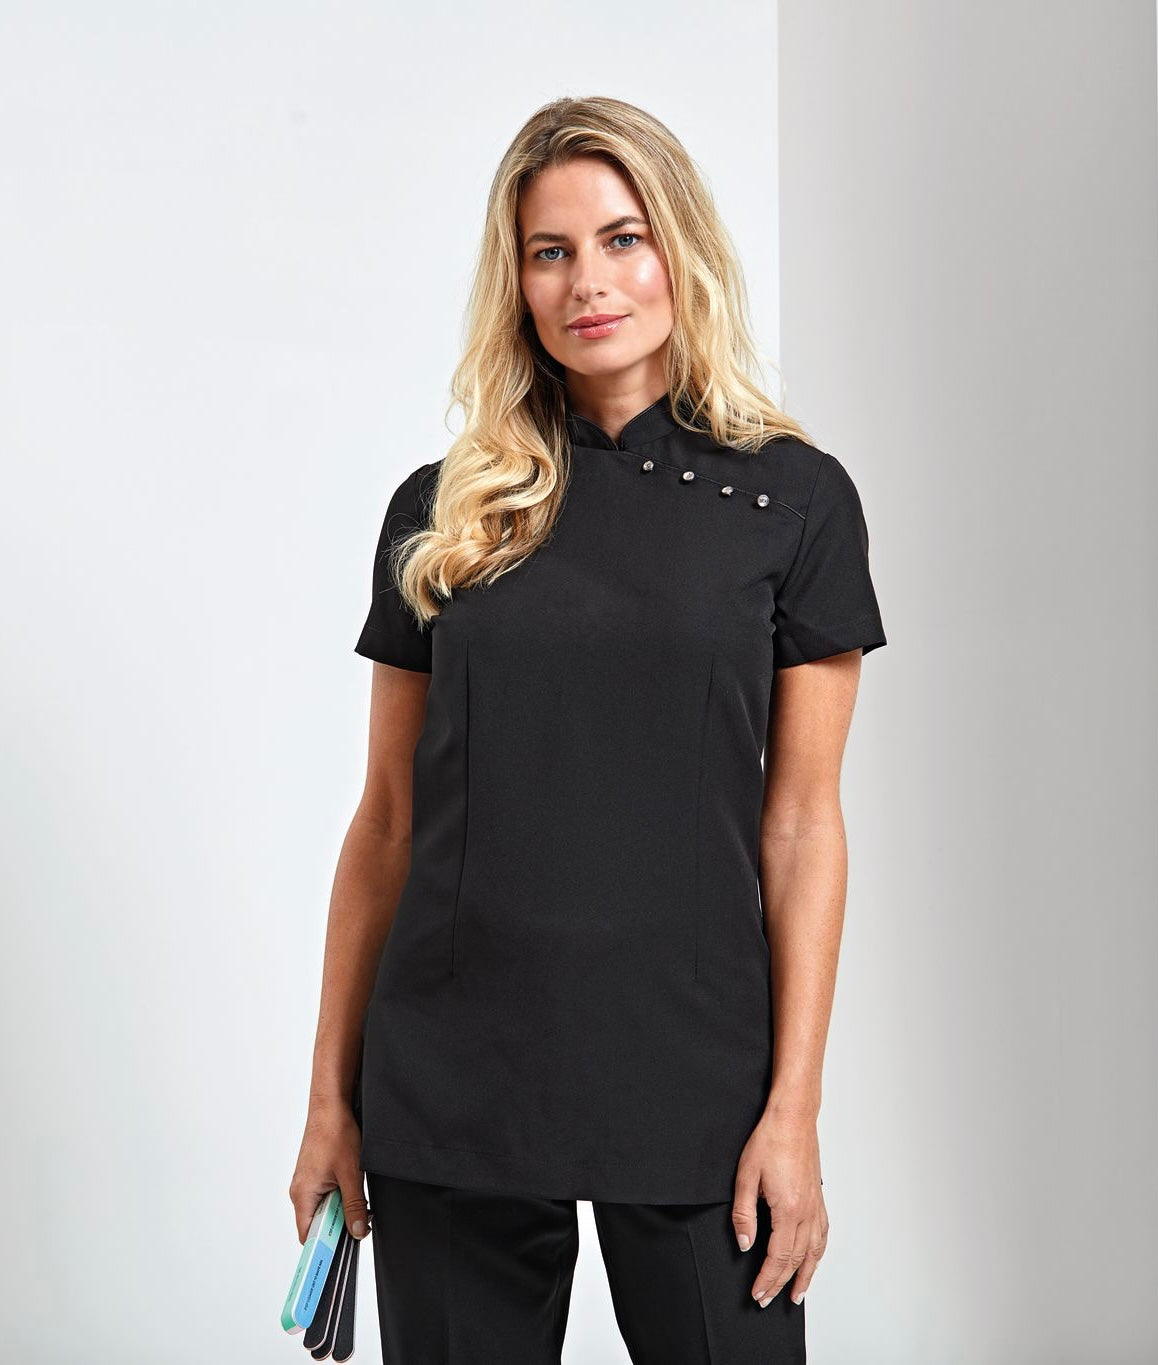 Premier Ladies Mika Short Sleeve Embroidered Tunic